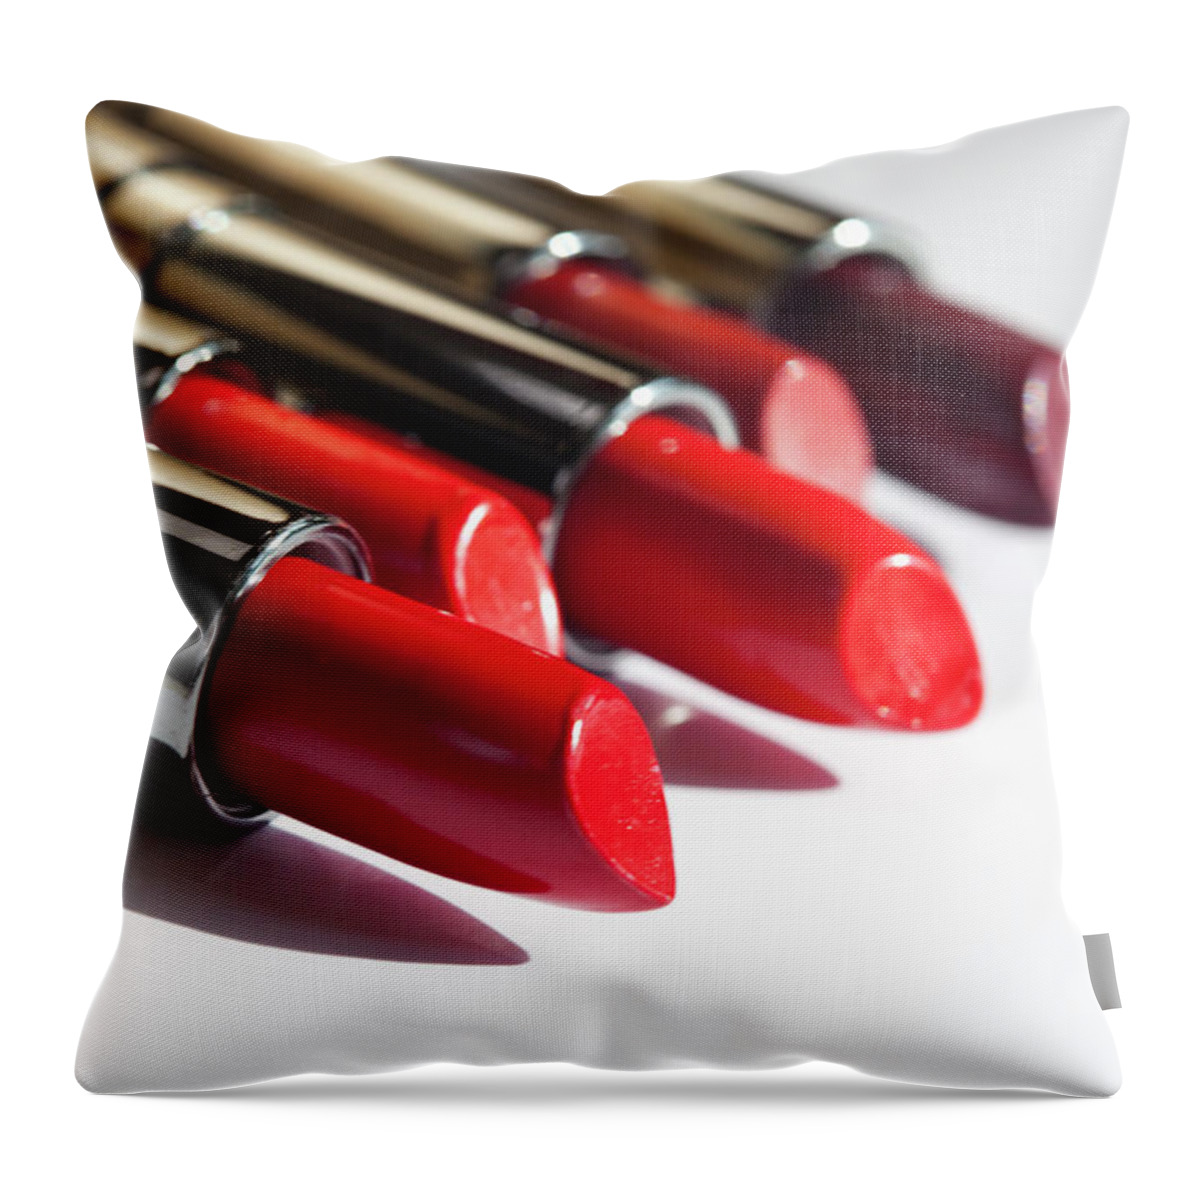 Five Objects Throw Pillow featuring the photograph Row Of Lip-sticks On White by Reggie Casagrande